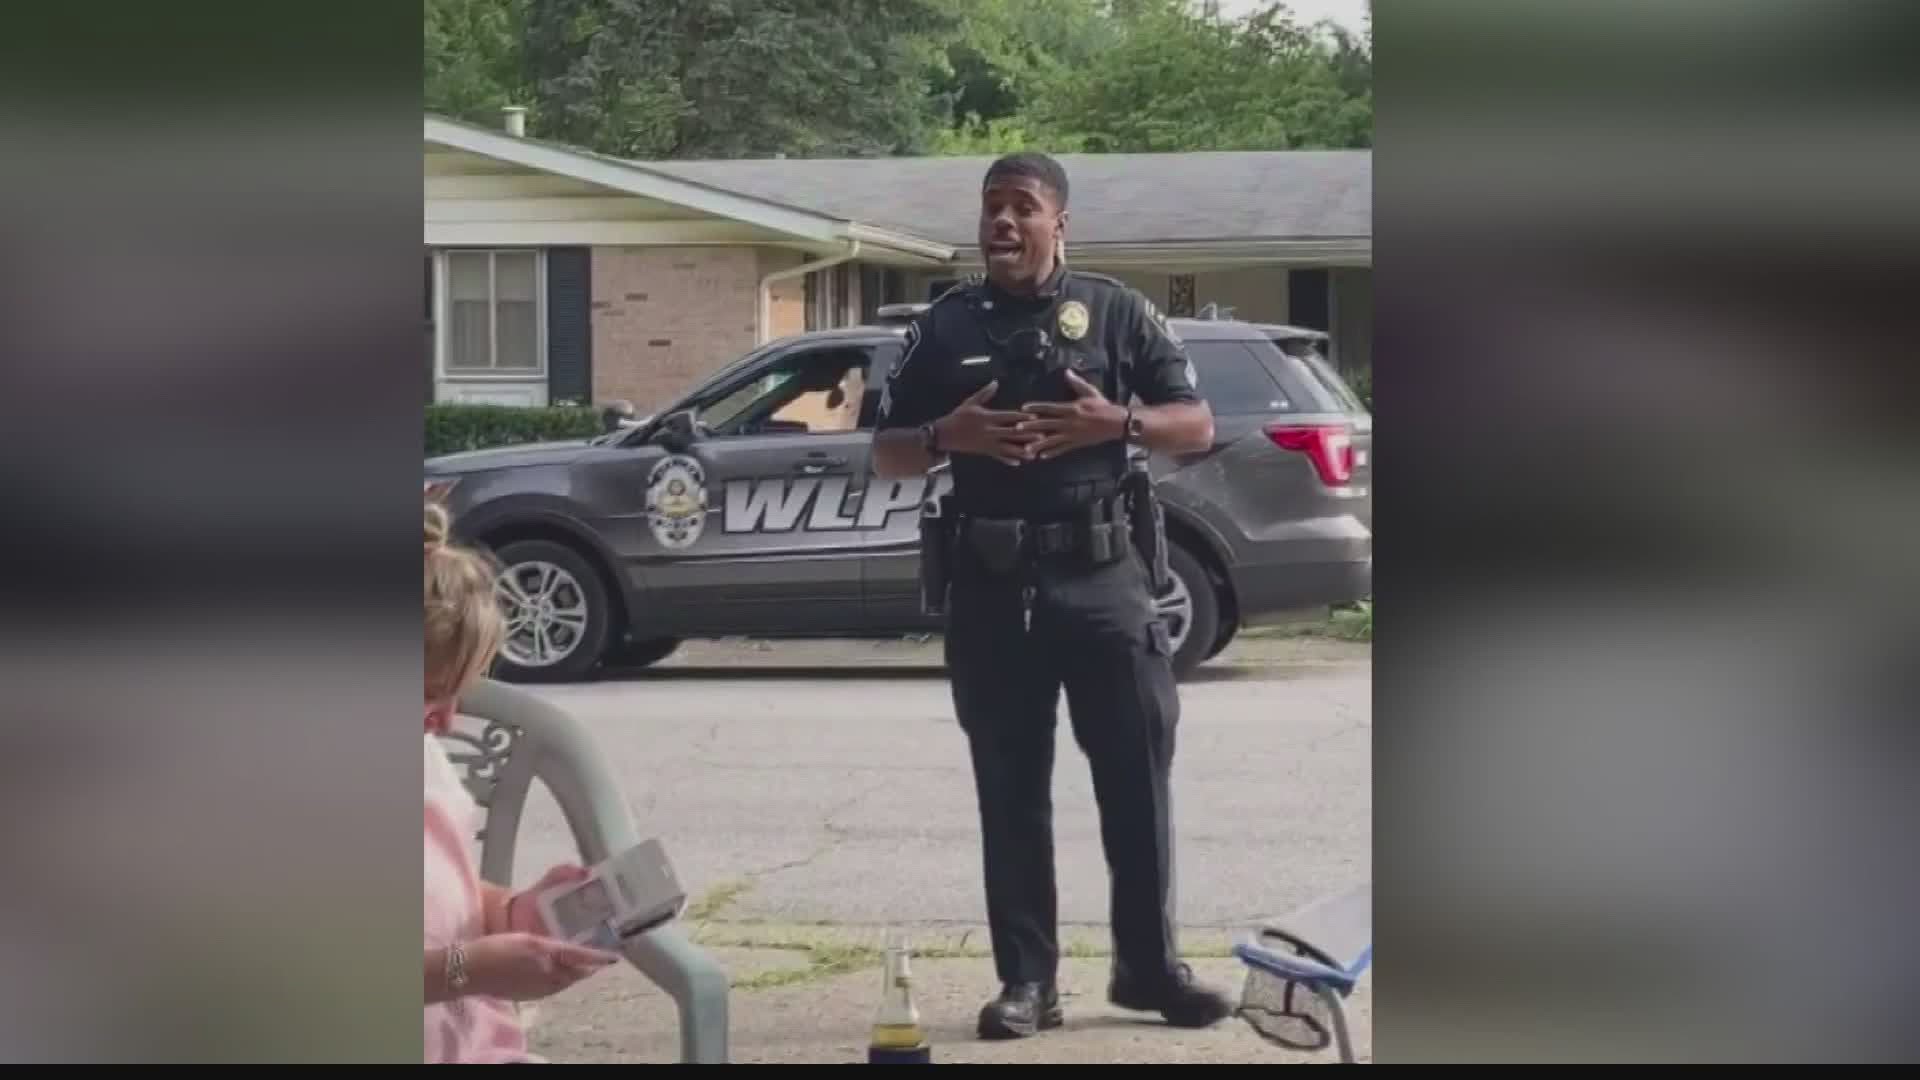 A family in West Lafayette didn't expect a police officer to join their birthday party and were shocked by his rendition of "Happy Birthday"!